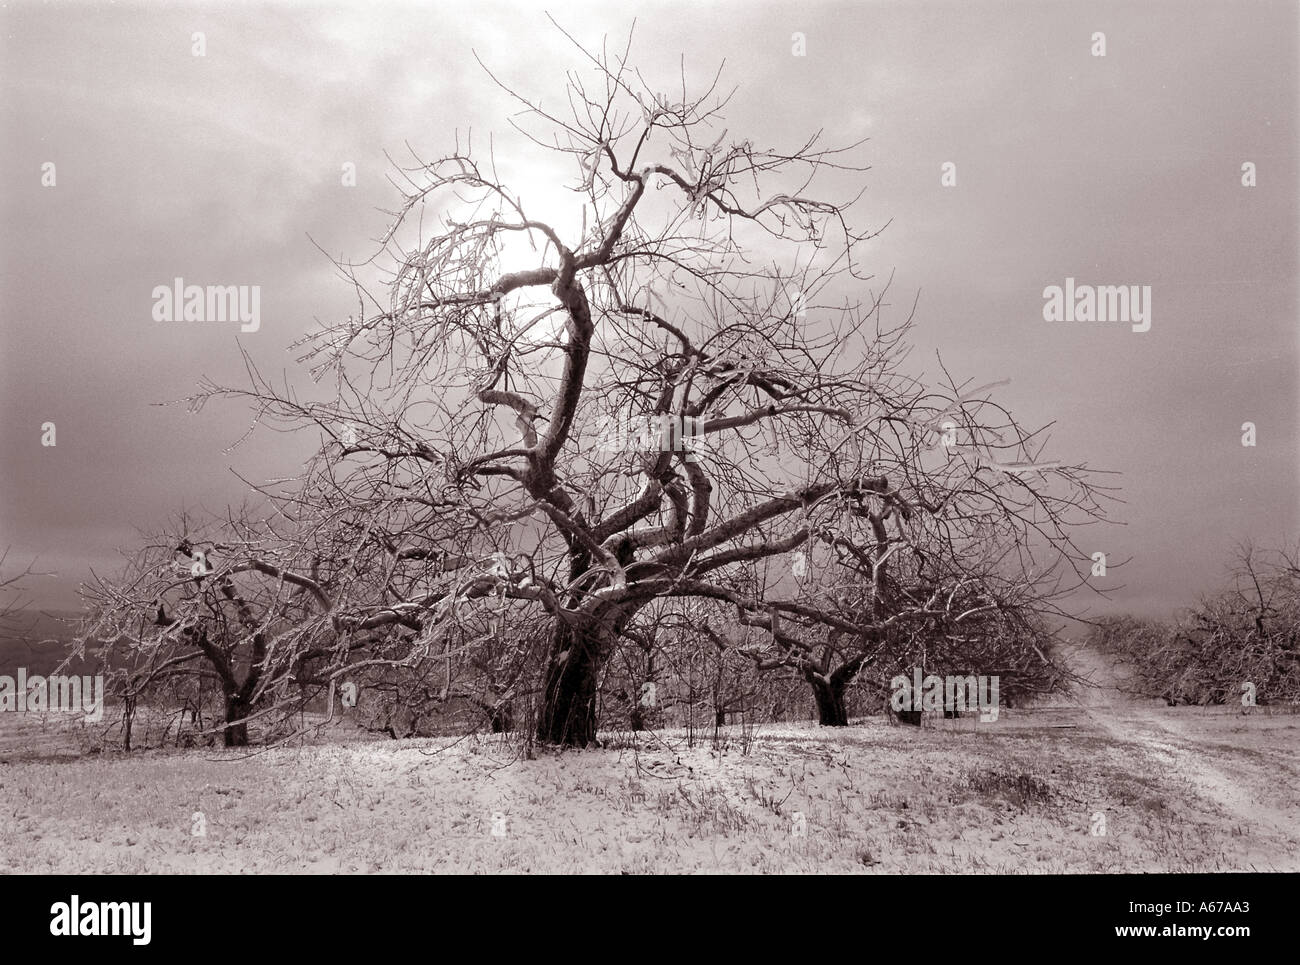 landscape beauty Tree with ice and stormy sky Stock Photo